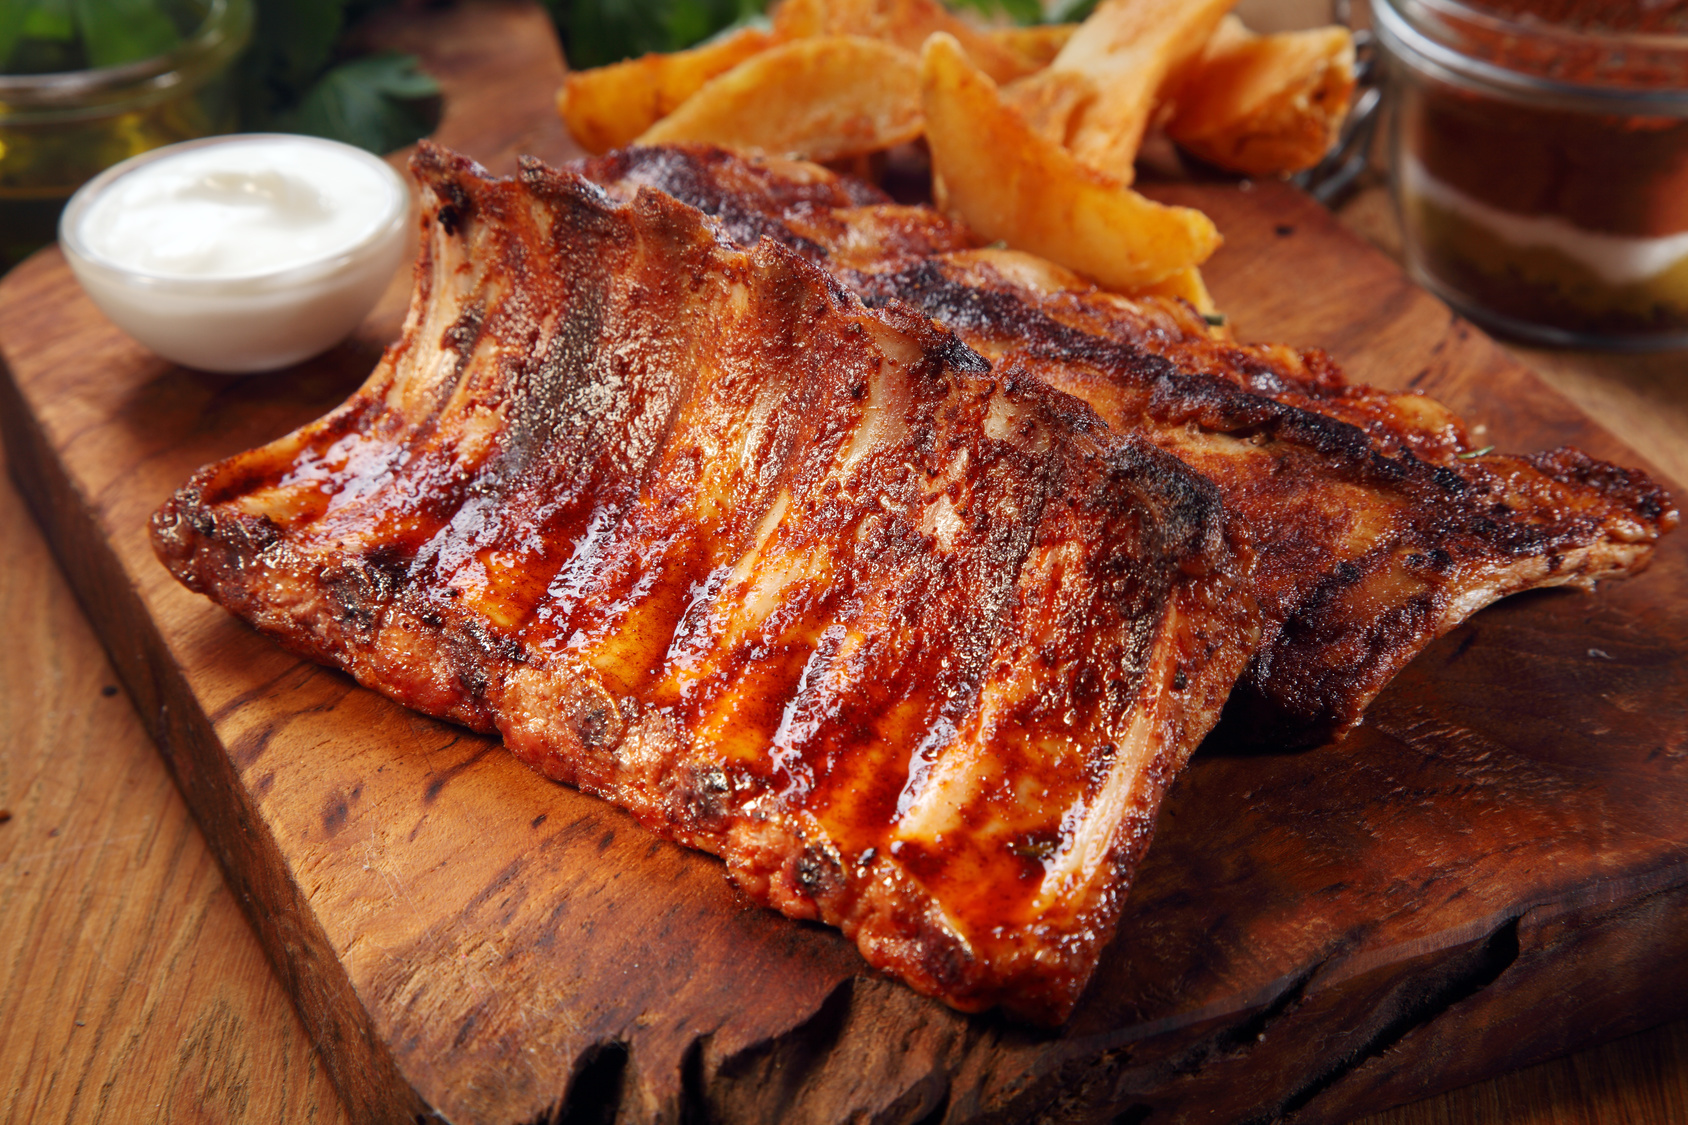 Close up Mouth Watering Juicy Grilled Pork Rib Meat on Top of Wooden Cutting Board